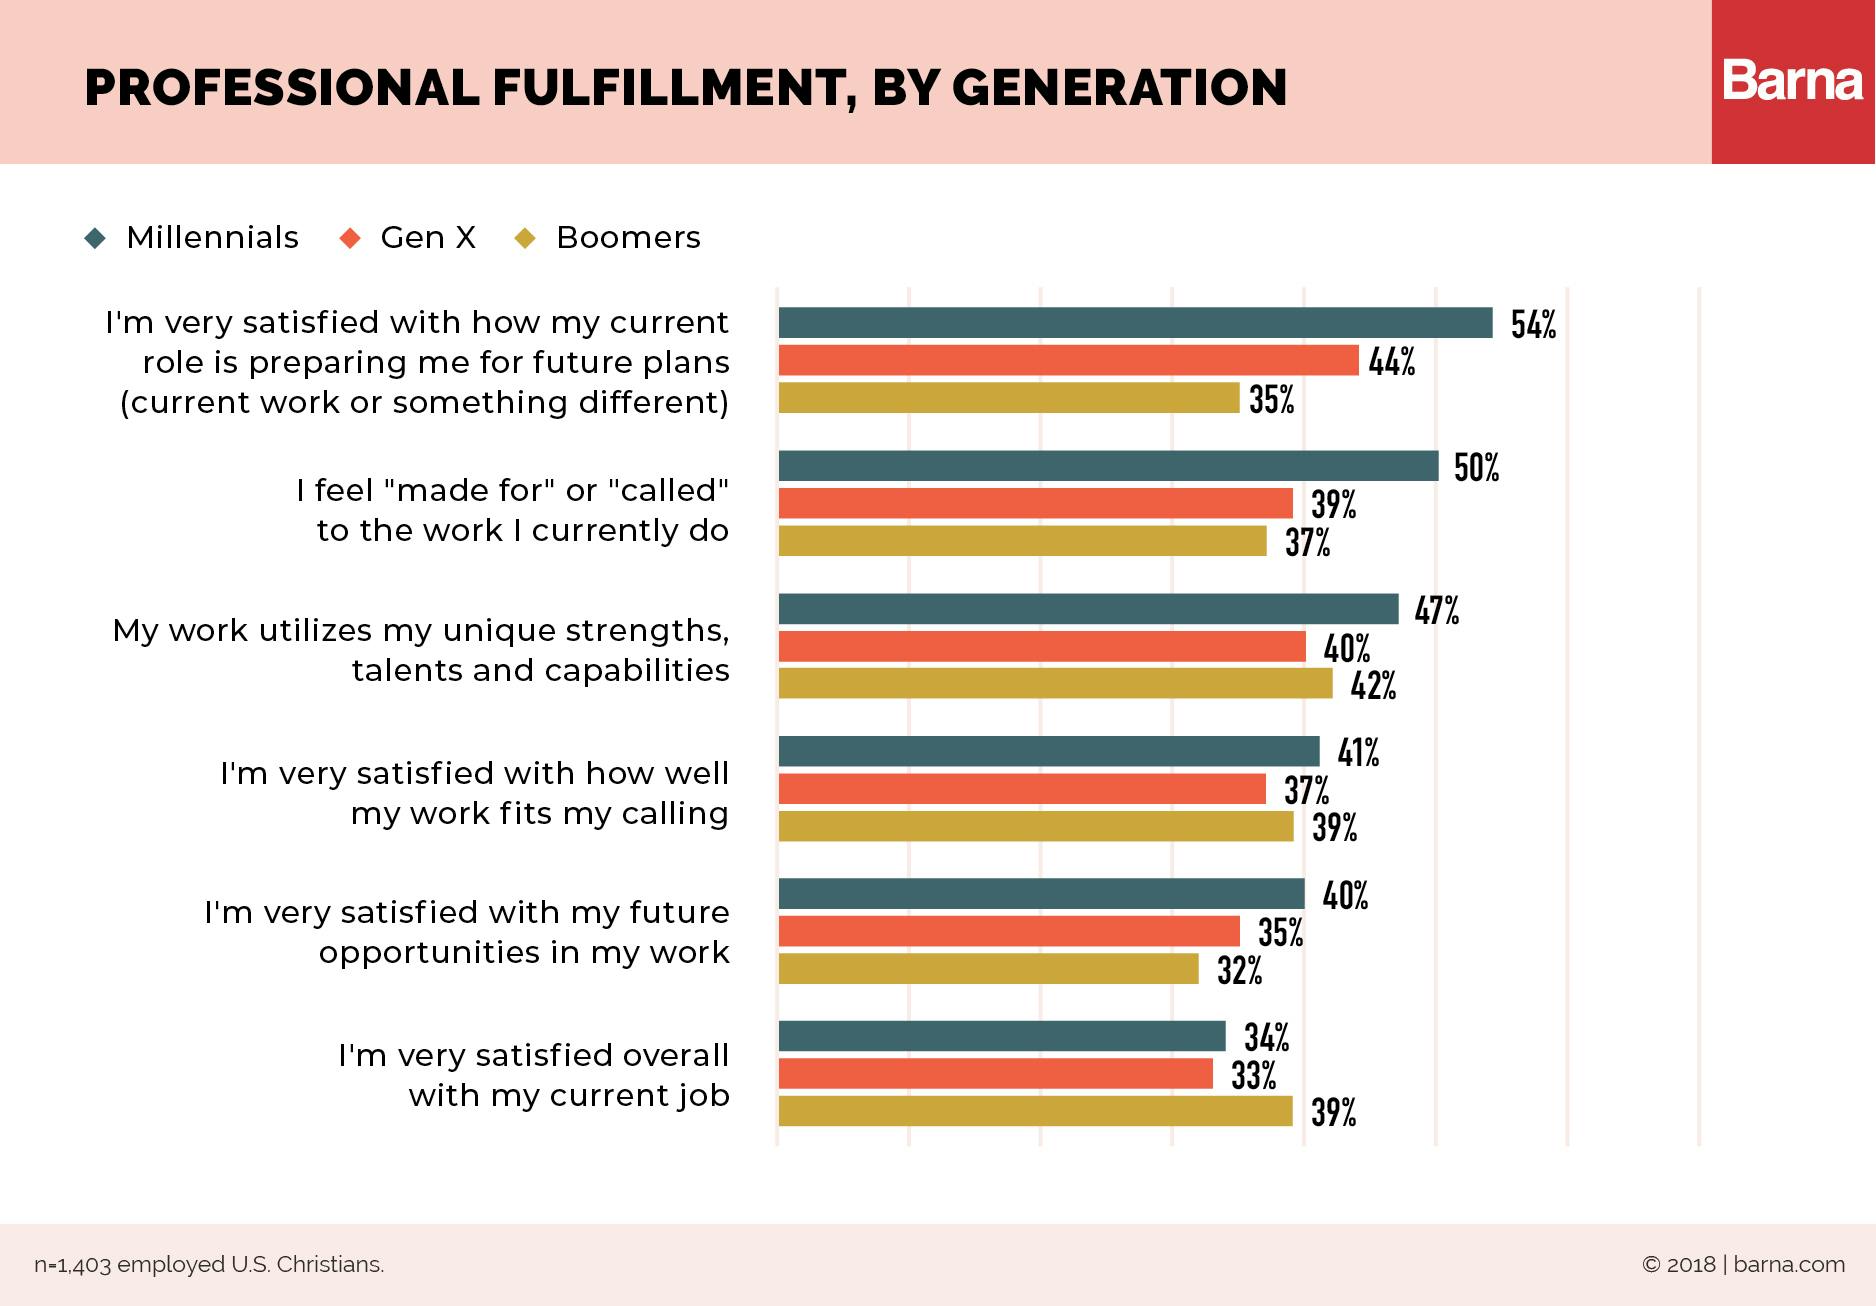 Millennials Bring Ambition and Optimism to Their Work